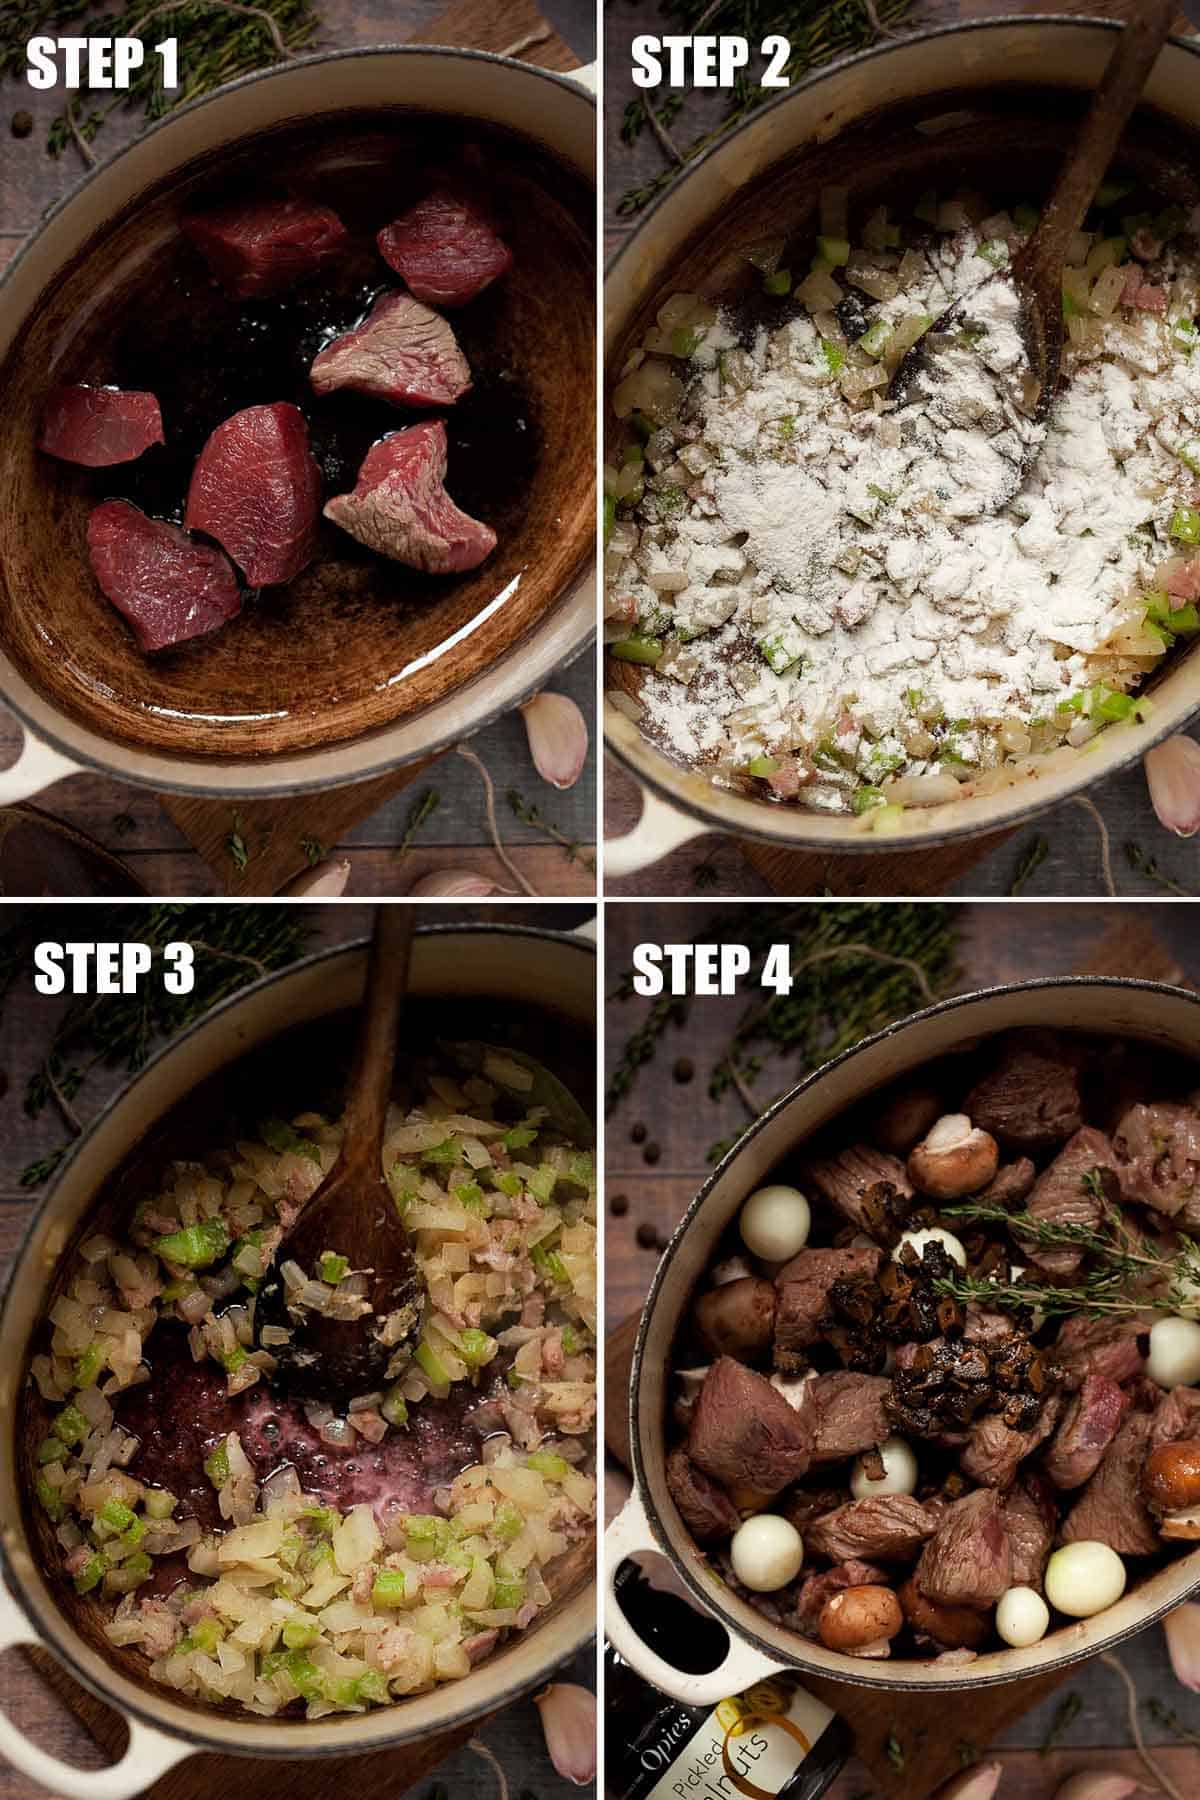 Collage of images showing a casserole being made.